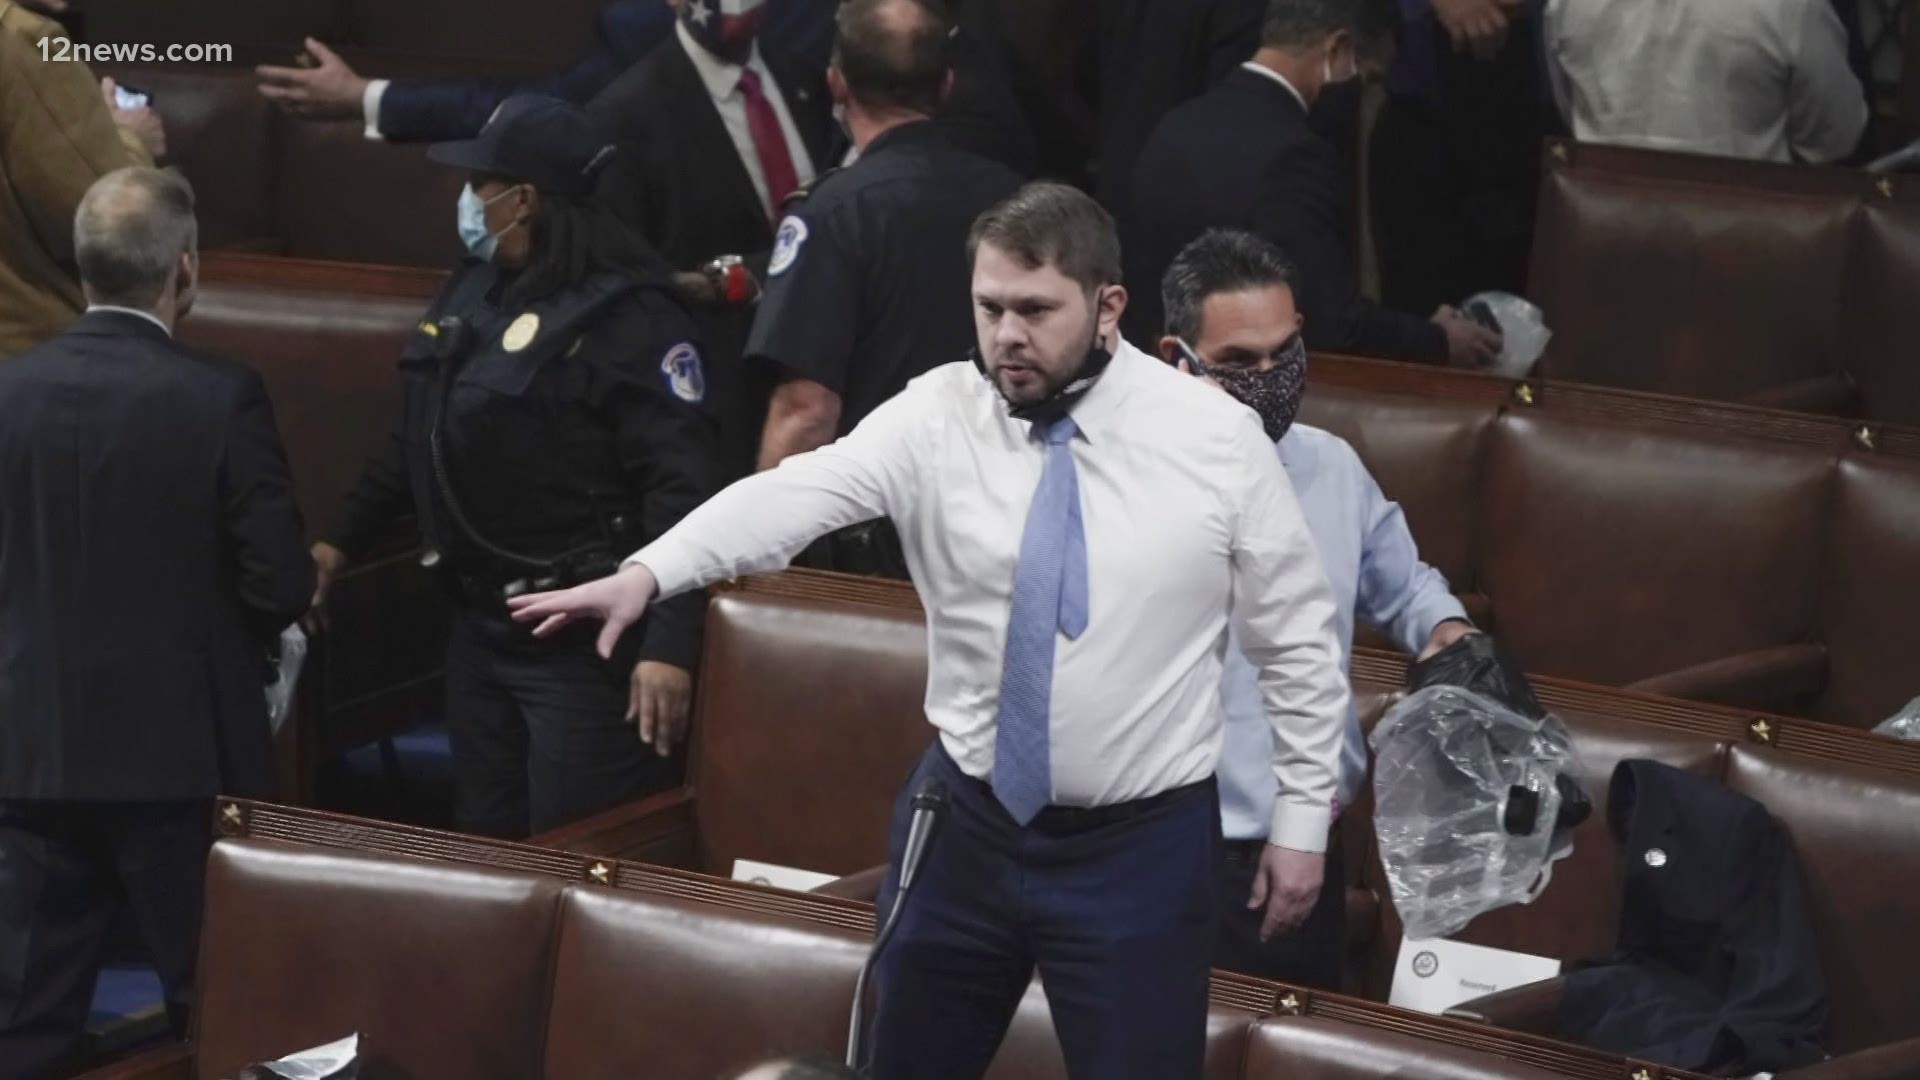 Sen. Kyrsten Sinema and Rep. Reuben Gallego, both Arizona lawmakers, were trapped in the U.S. Capitol when the mob made its way deeper into the building.